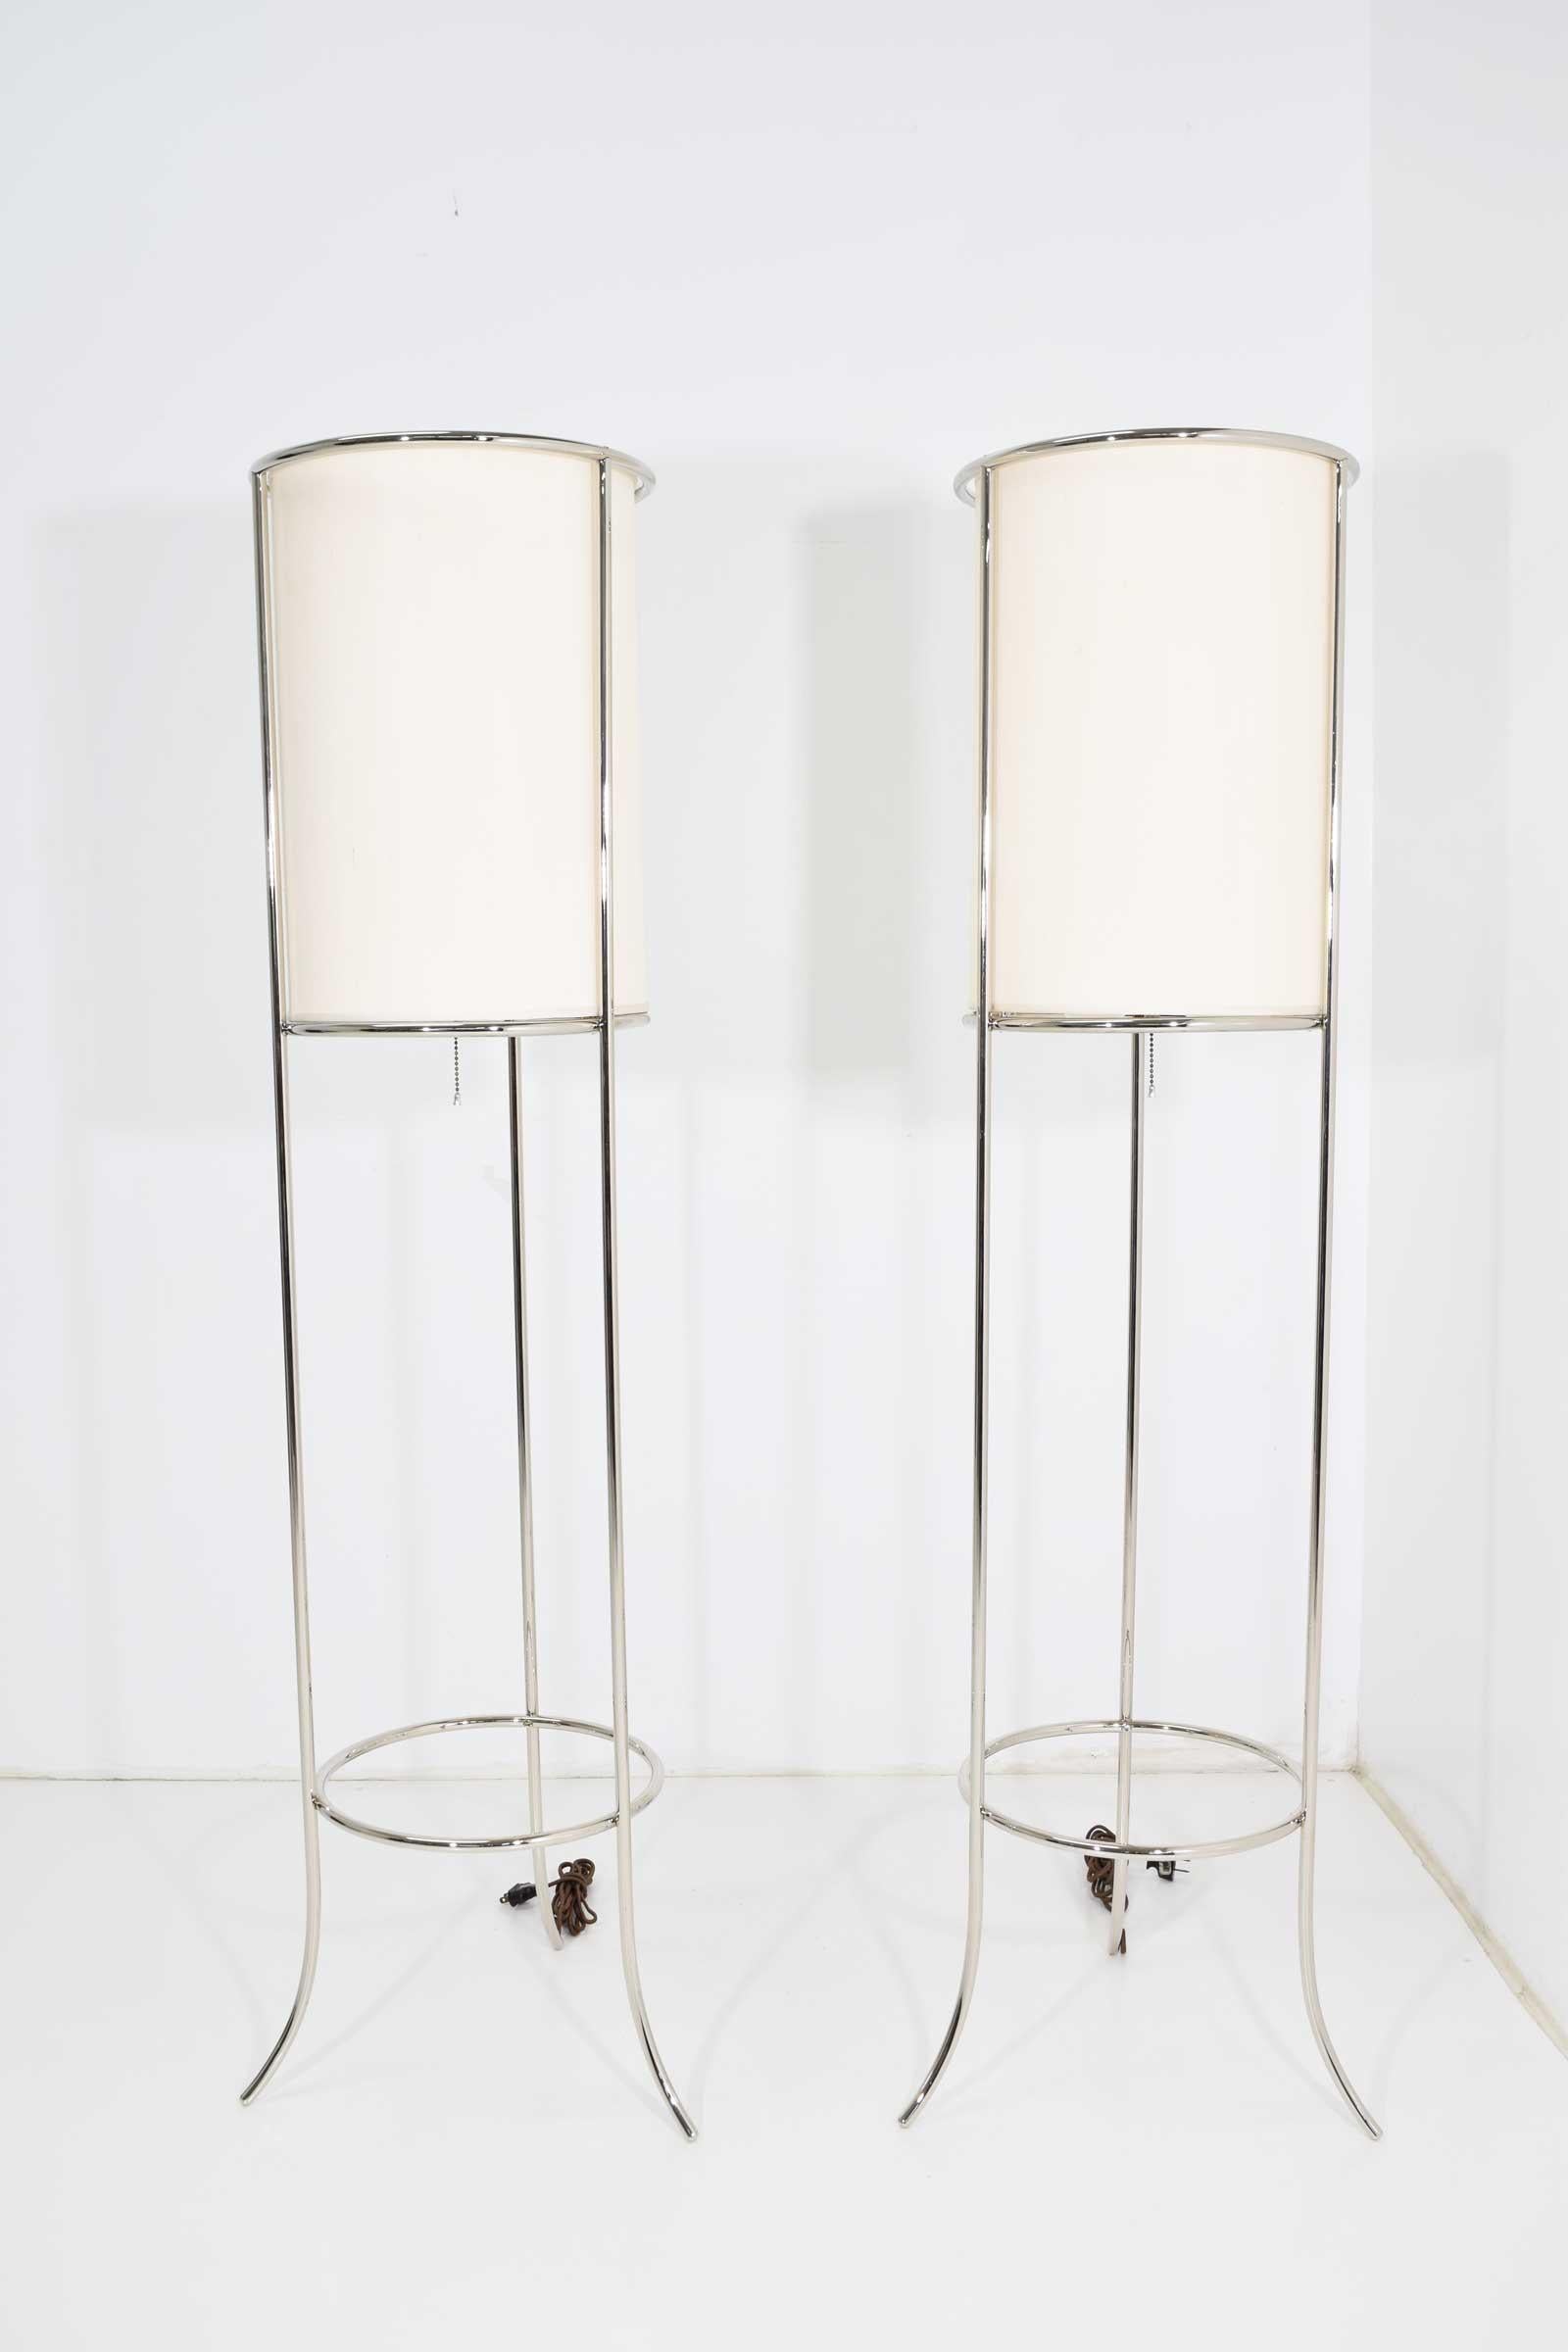 Nickel frame floor lamps with silk shade, fabric cord, two lights per lamp. Newly rewired.